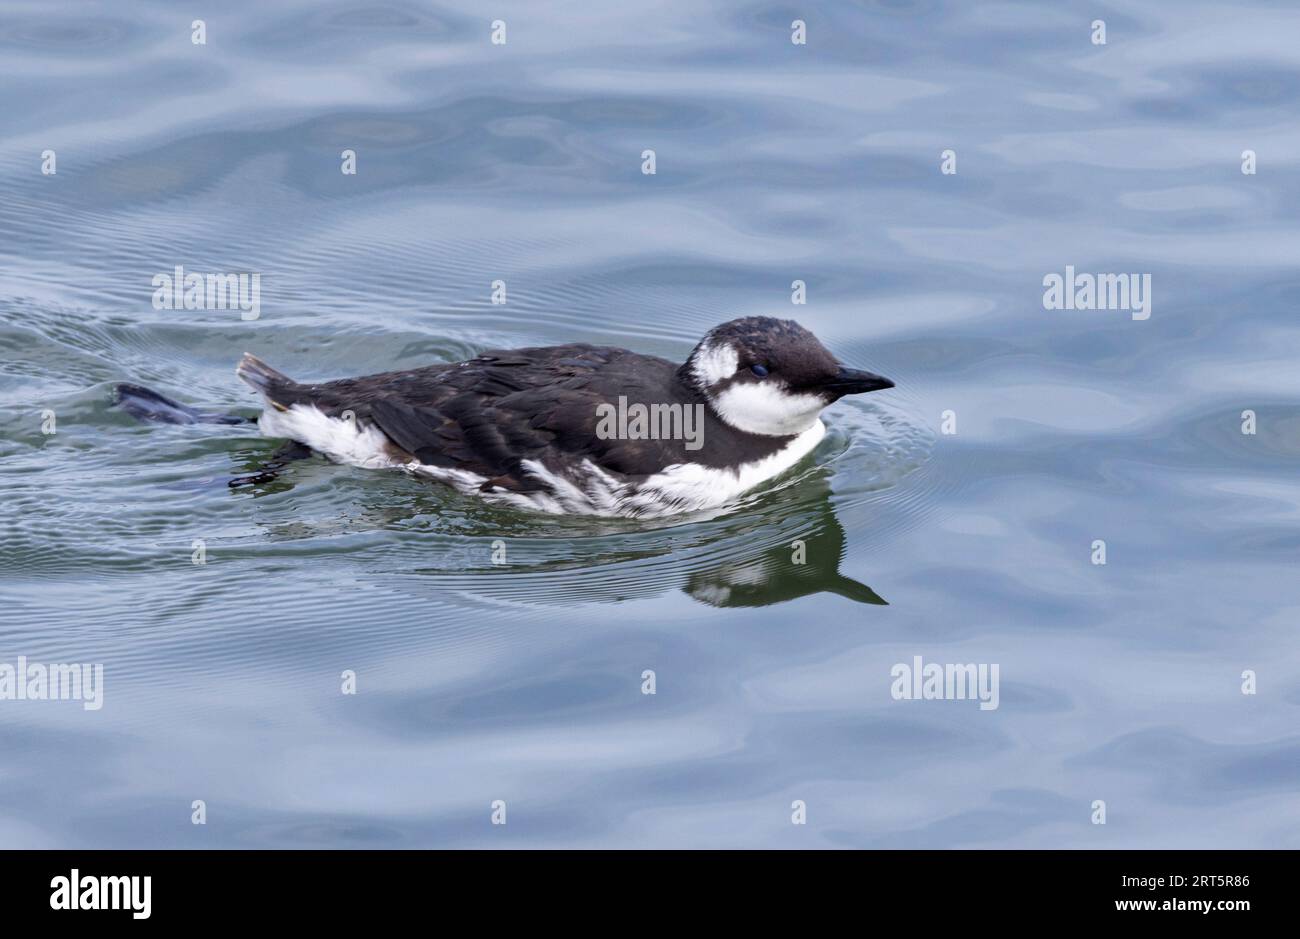 An adult Common Guillemot swims along close to shore. They often fish inshore, especially when following shoals of sand eels, a favourite food. Stock Photo